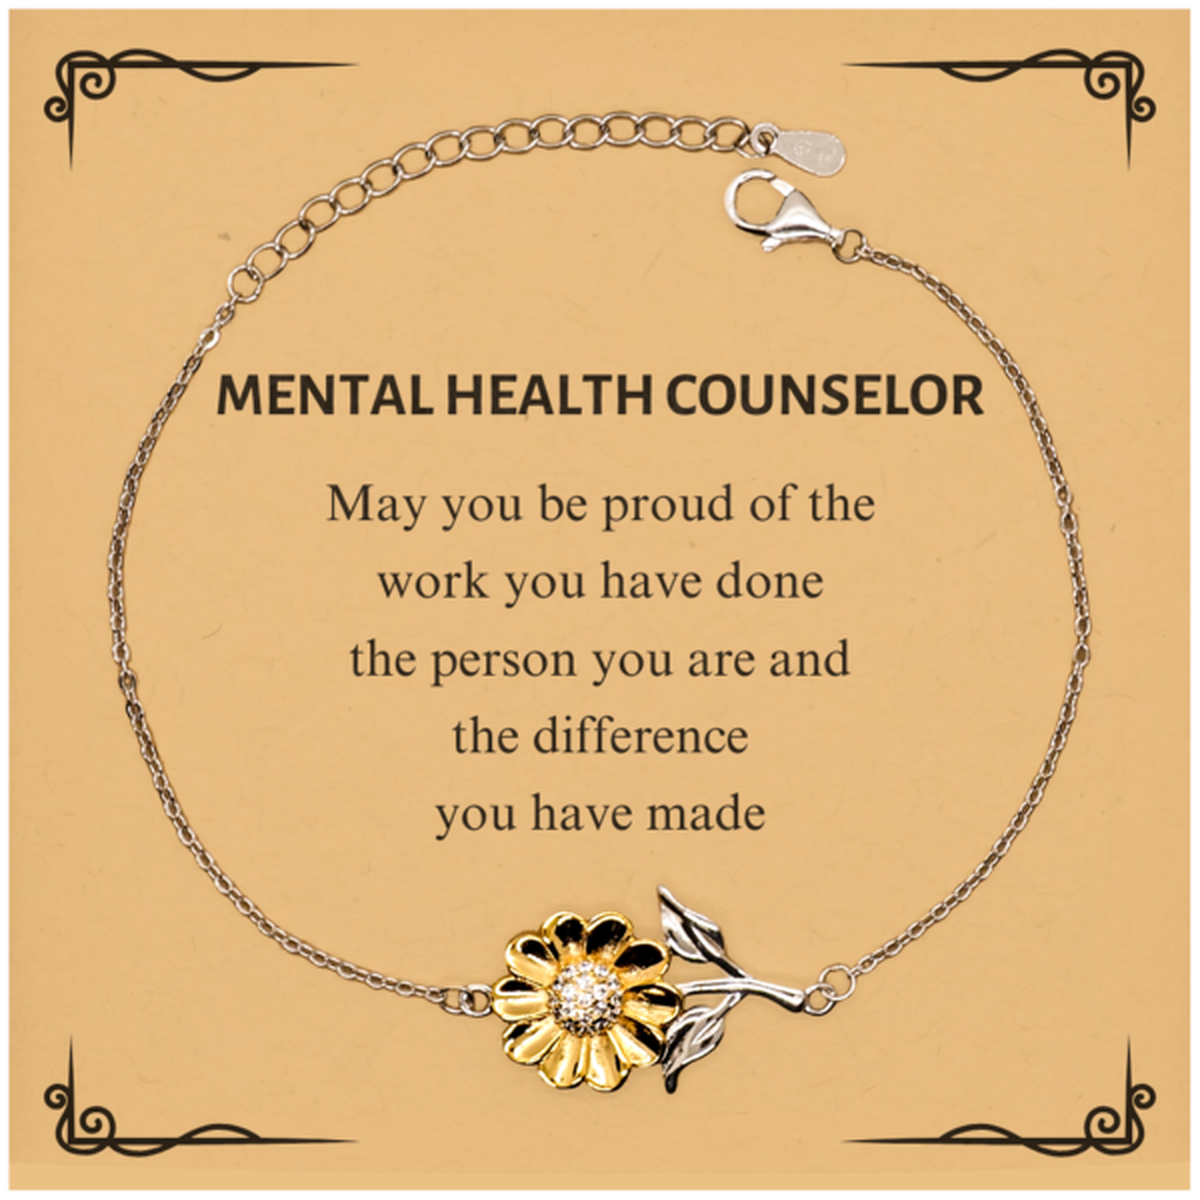 Mental Health Counselor May you be proud of the work you have done, Retirement Mental Health Counselor Sunflower Bracelet for Colleague Appreciation Gifts Amazing for Mental Health Counselor